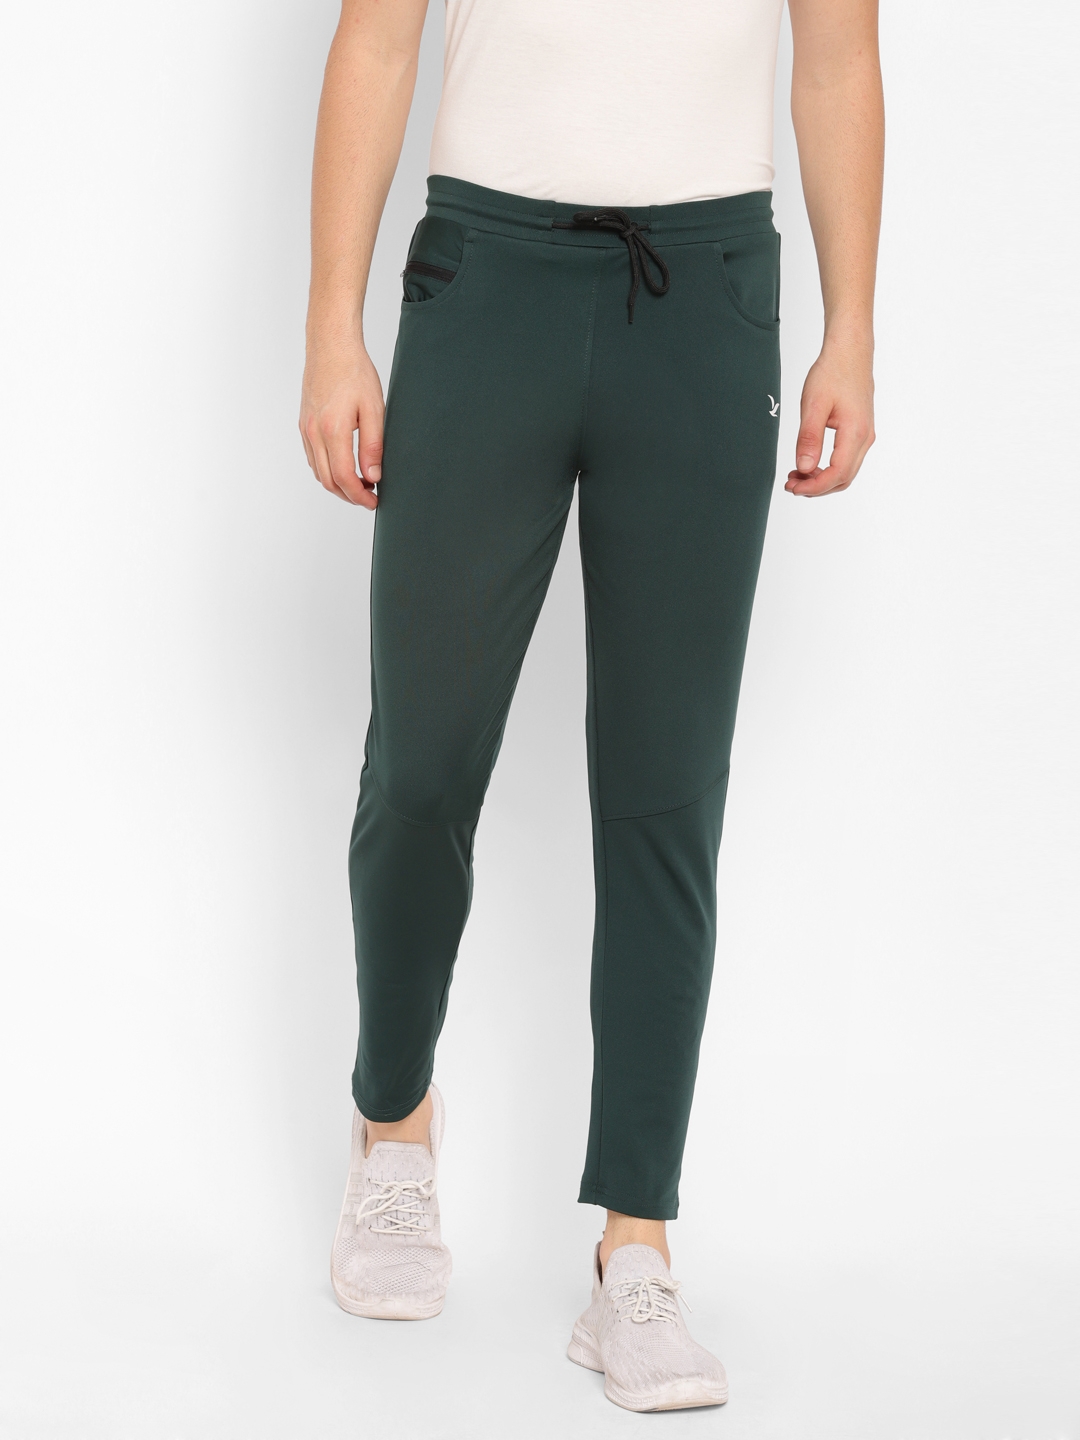 Cape Canary | Cape Canary Men's Green Cotton Lycra Solid Slim-Fit Jogger Pants